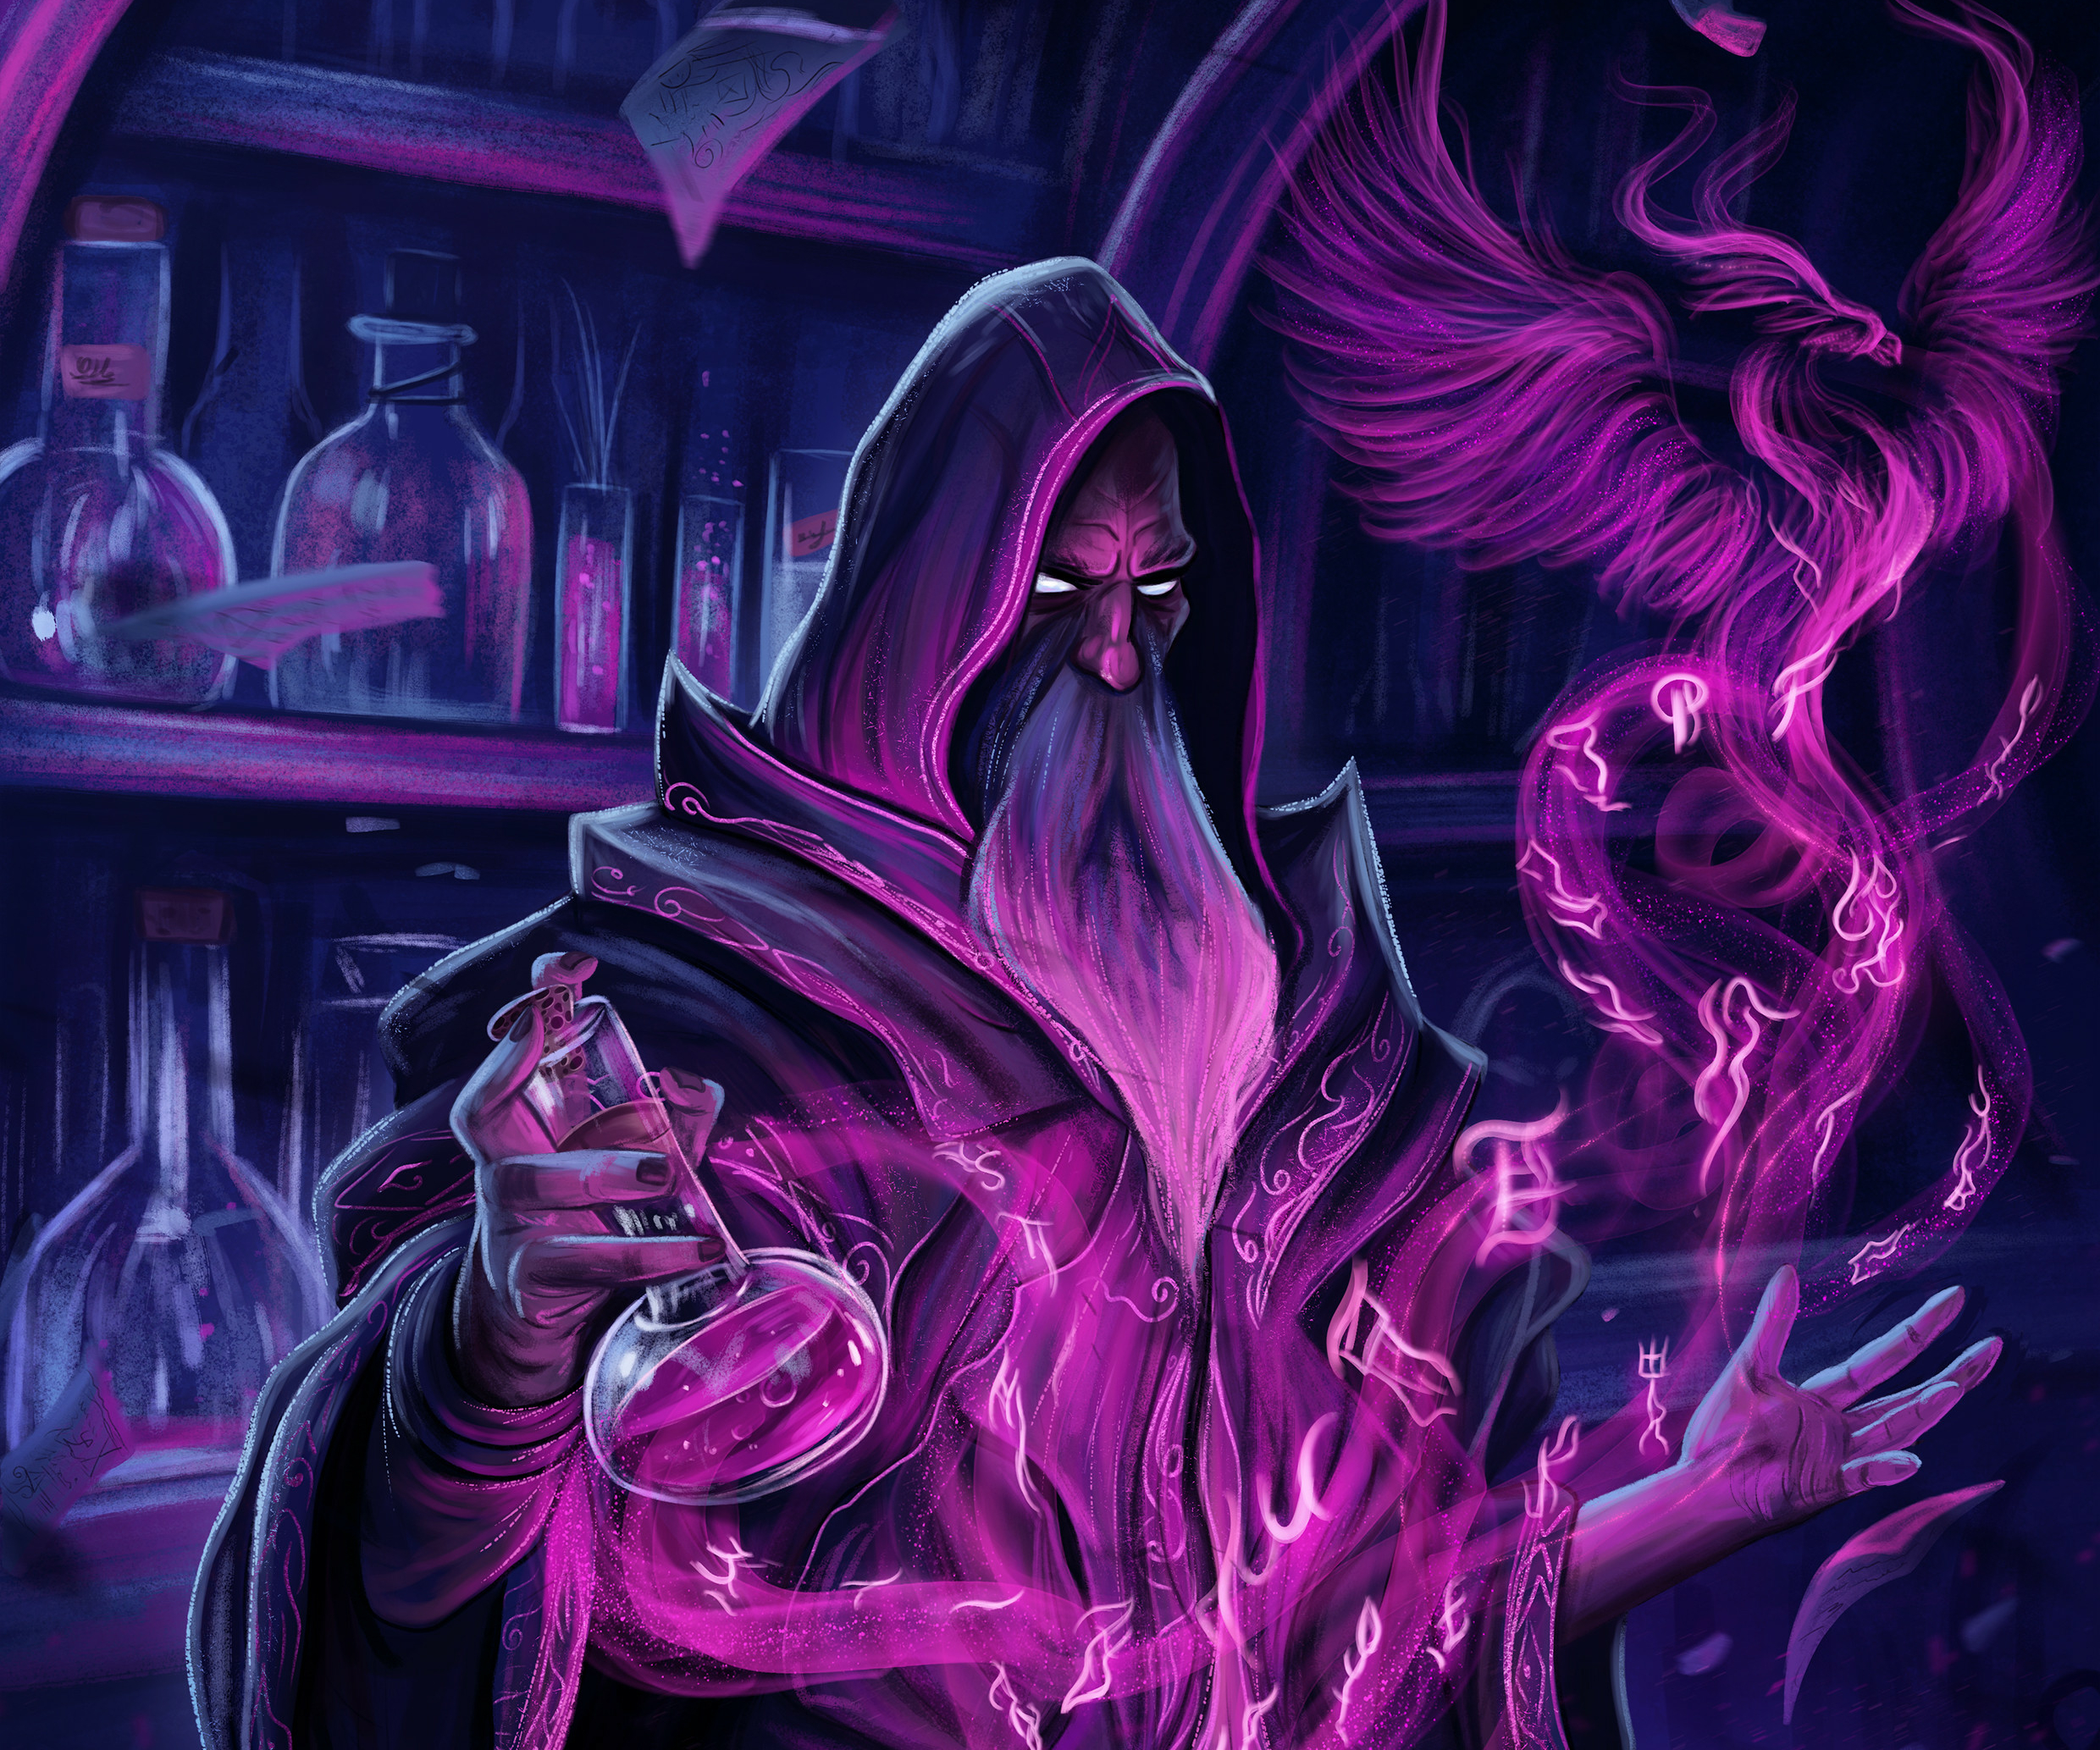 The Potions Wizard by Margaux Valonia Butet